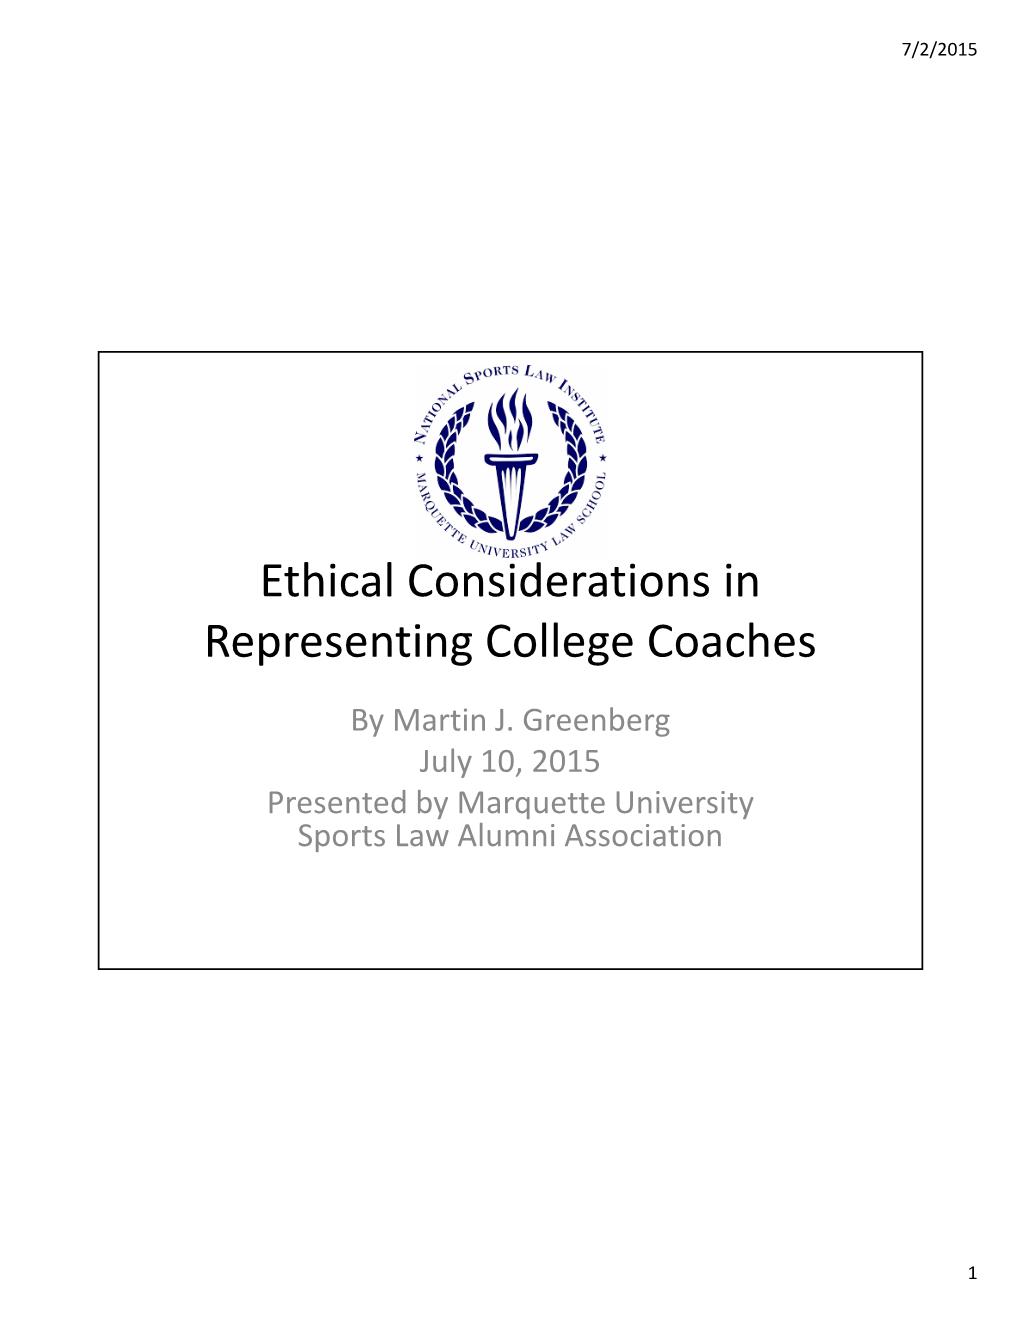 Ethical Considerations in the Representation of College Coaches